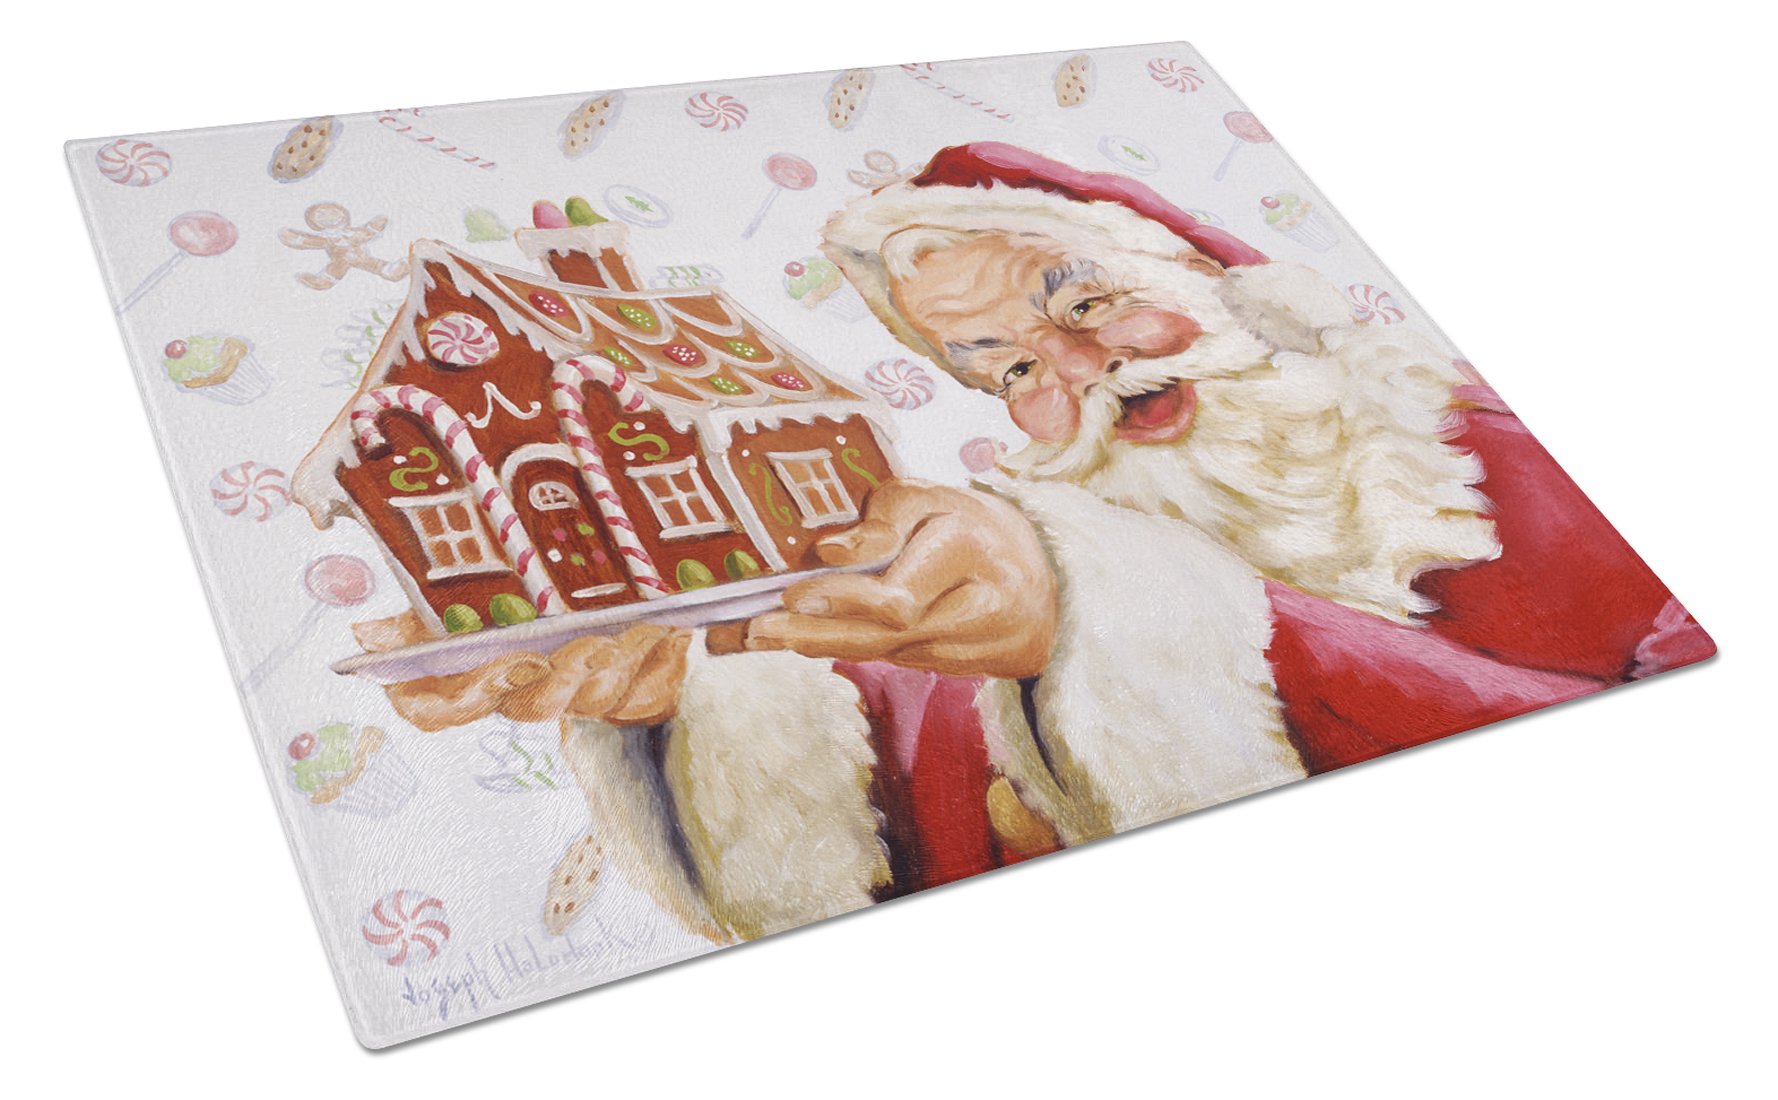 Santa Claus A Home for the Holidays Glass Cutting Board Large PJH3006LCB by Caroline's Treasures